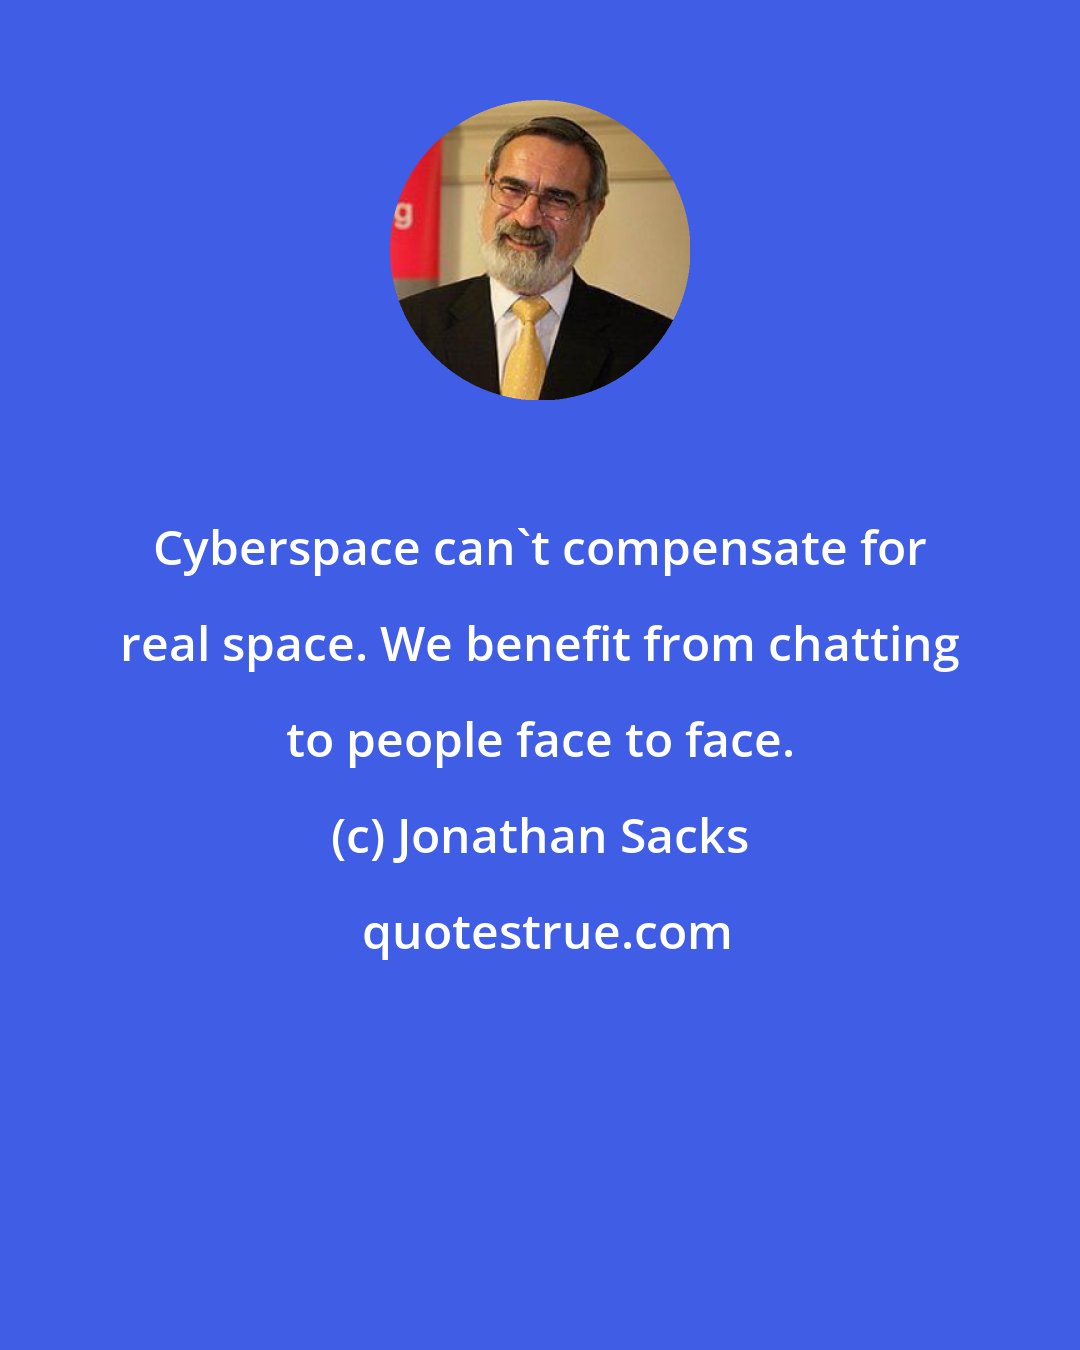 Jonathan Sacks: Cyberspace can't compensate for real space. We benefit from chatting to people face to face.